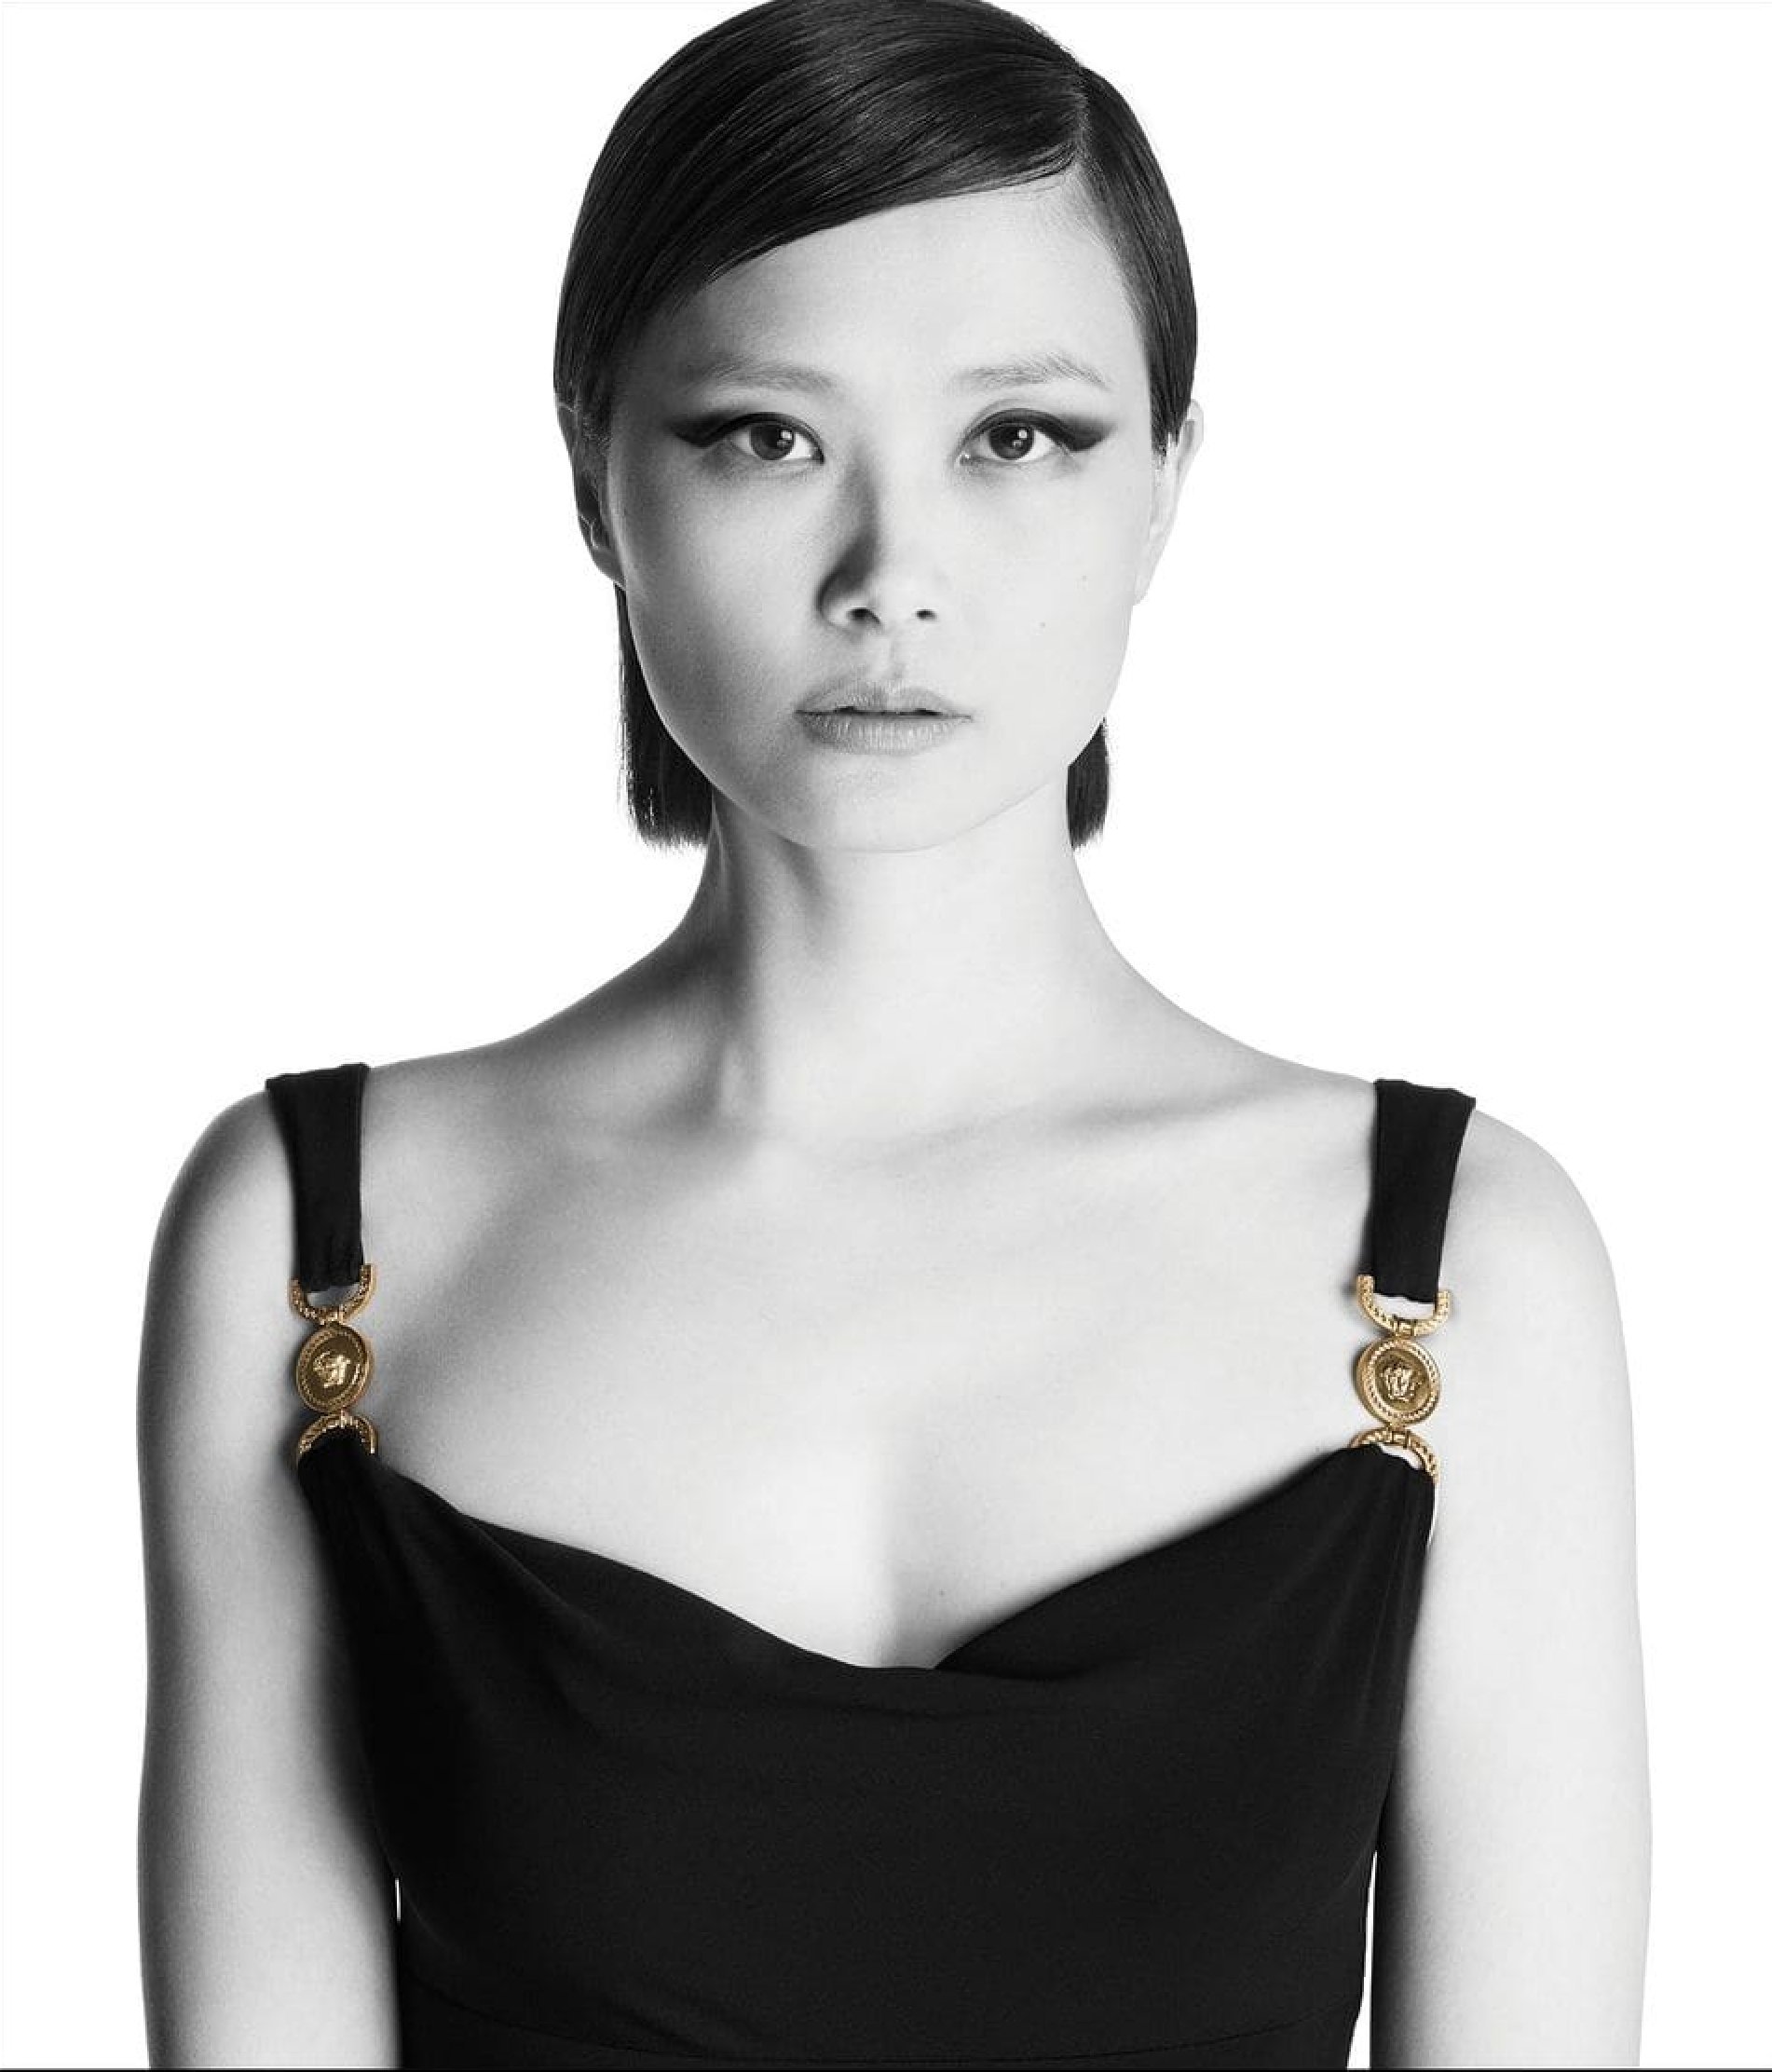 The Givenchy Three — HoYeon Jung in Louis Vuitton 28th Annual Screen